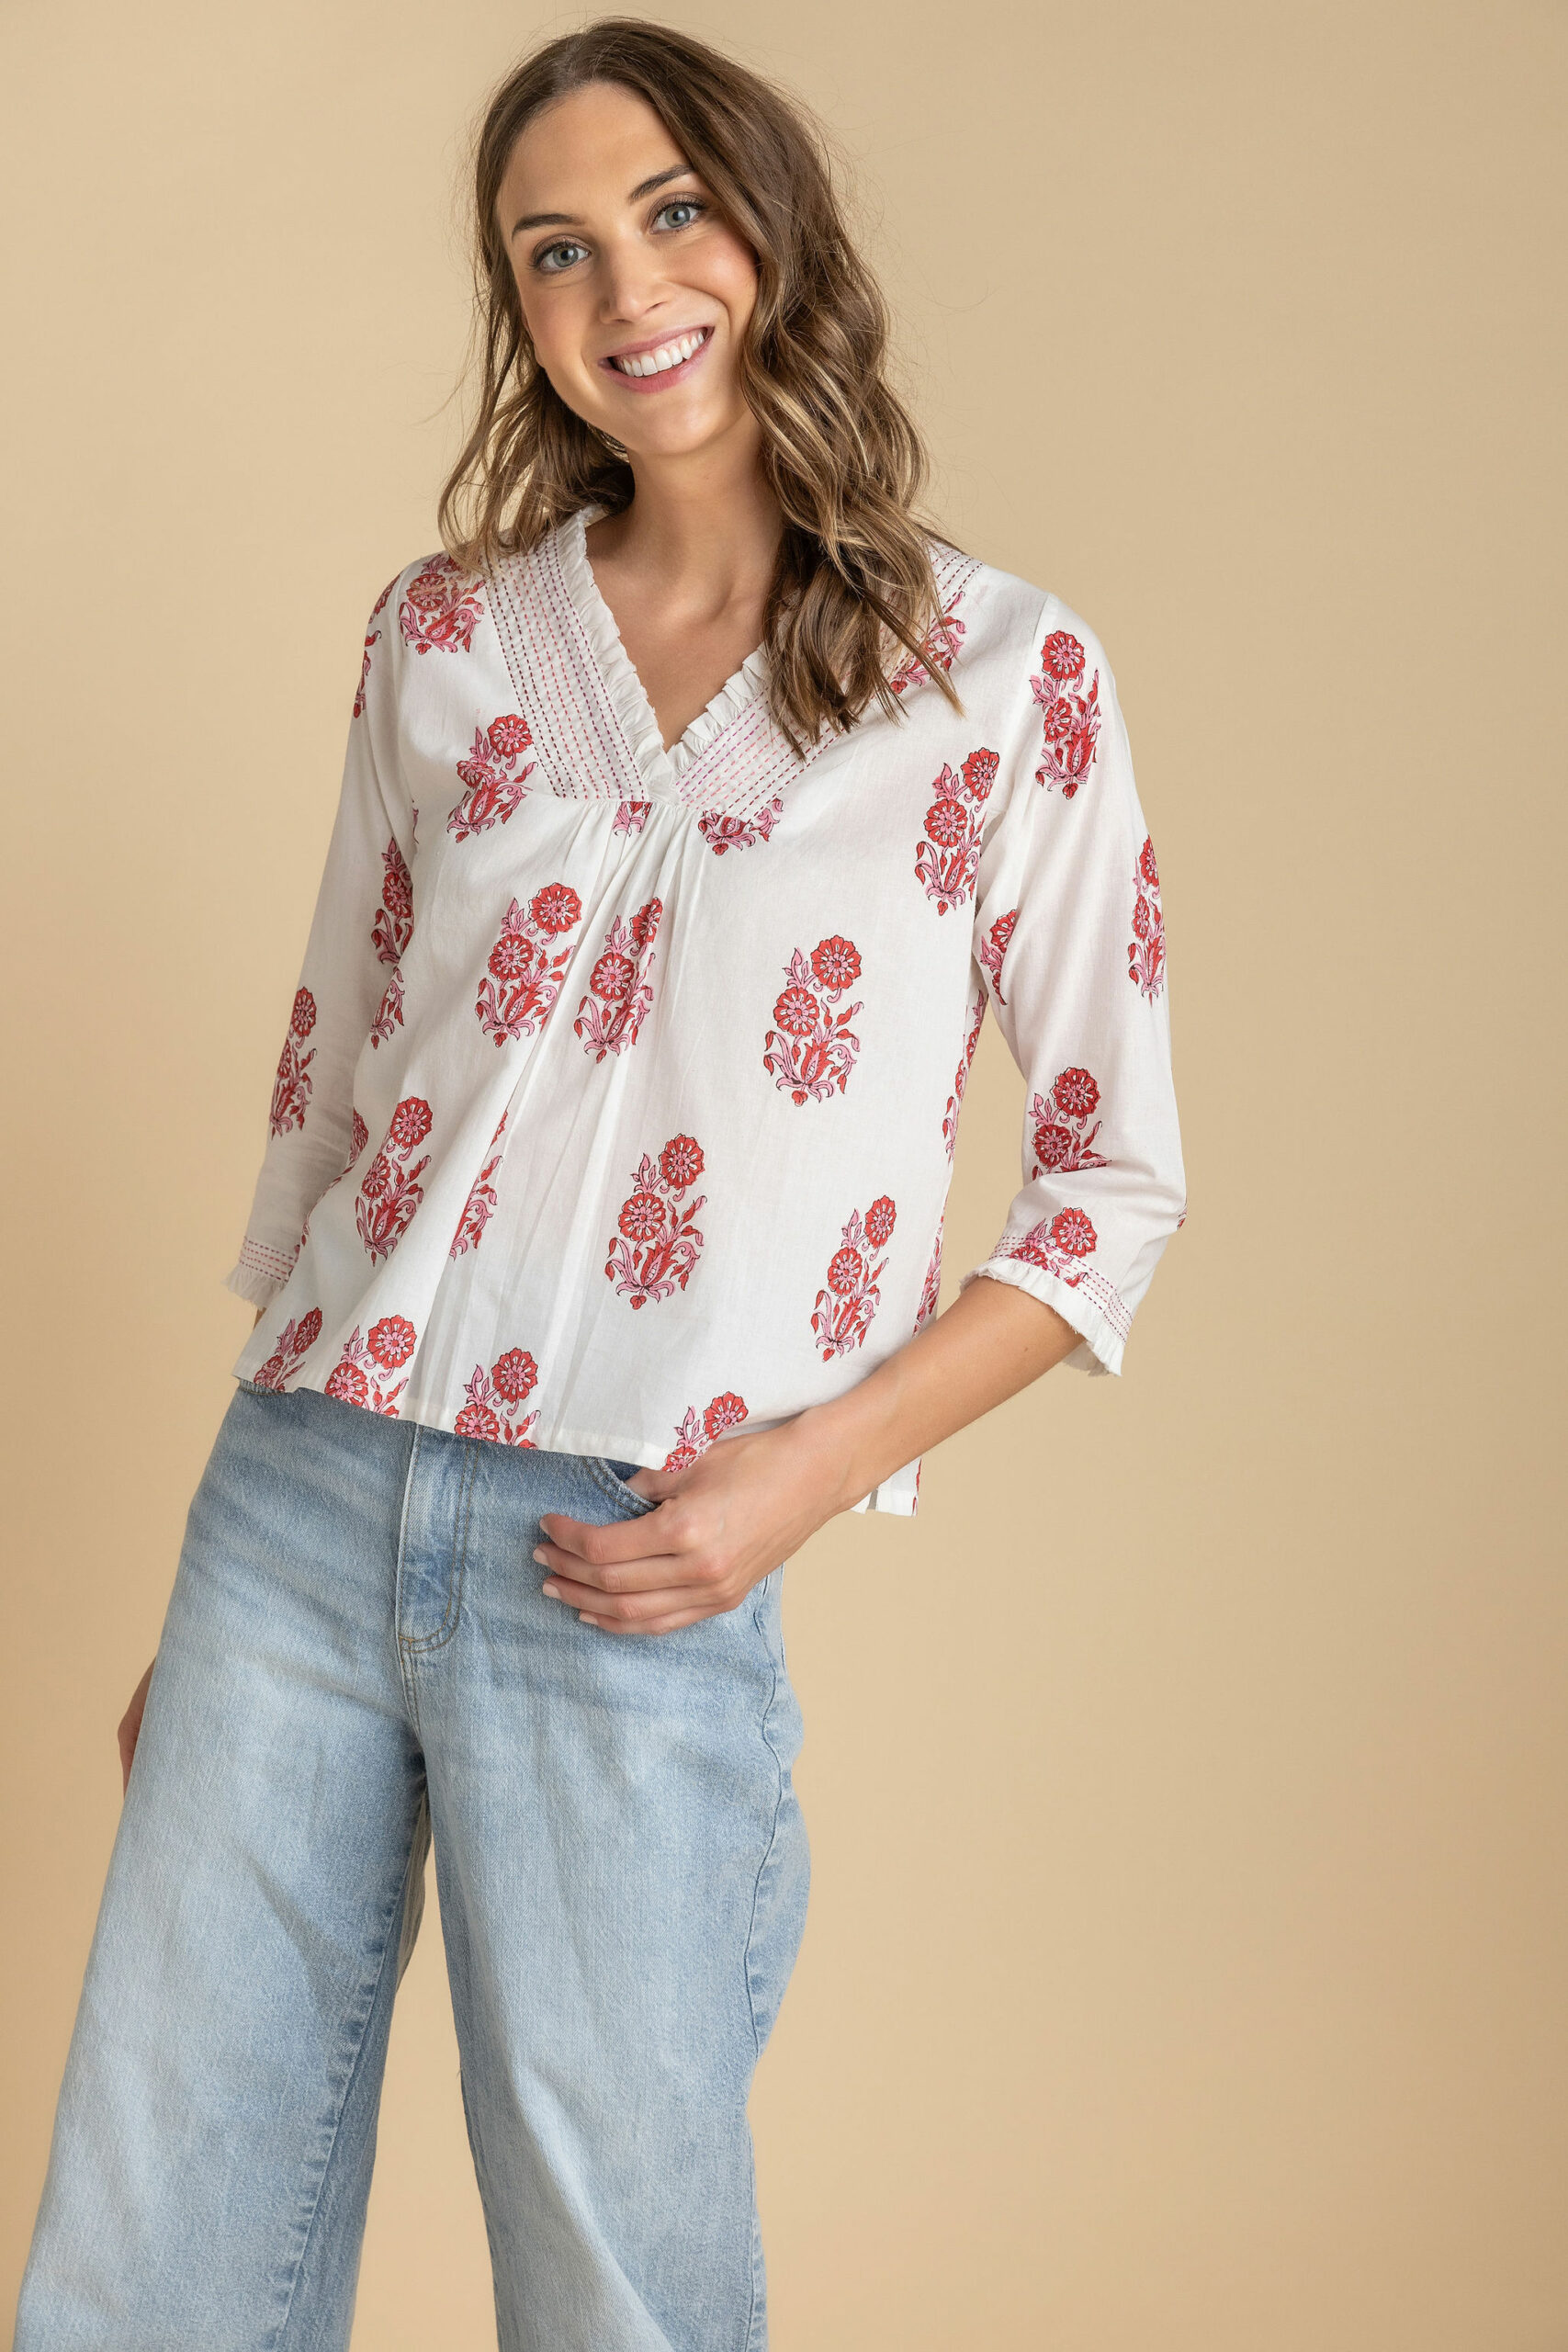 Rigby Red and White Cotton Top - Amaya Textiles